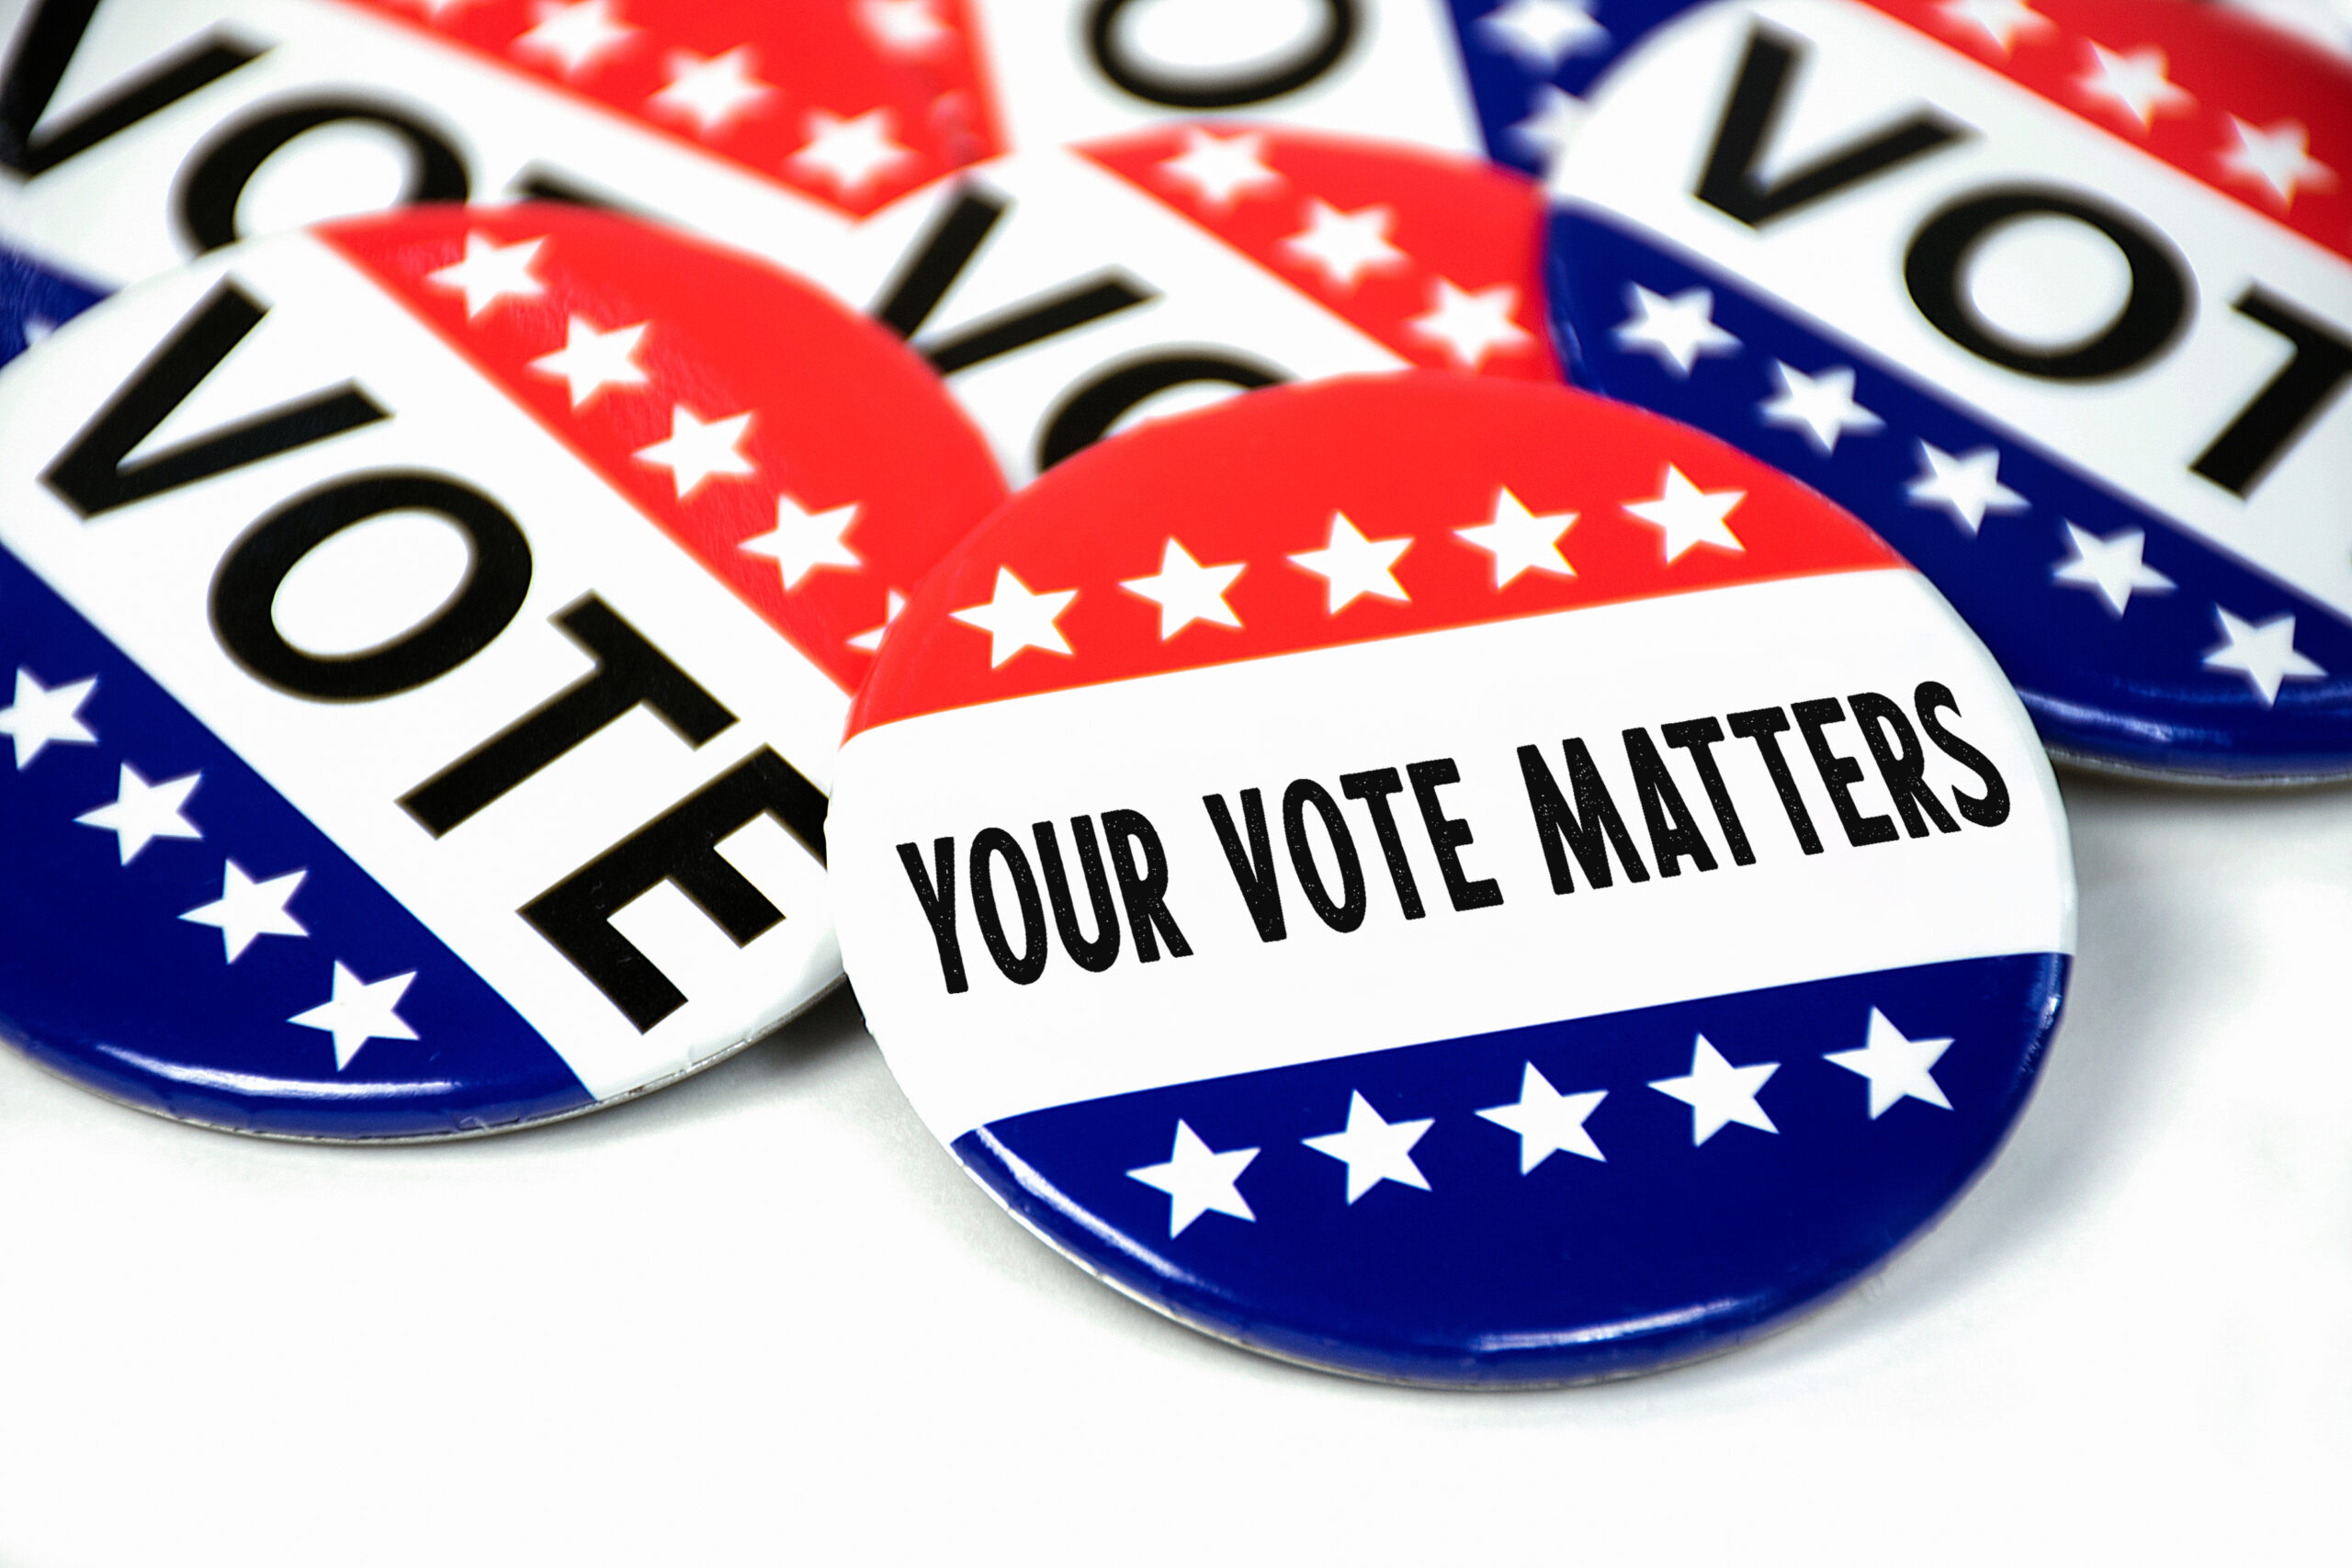 Dr. Curry-Winchell, Dr. BCW, Vot-ER, Voting Impacts Health? Voter Registration